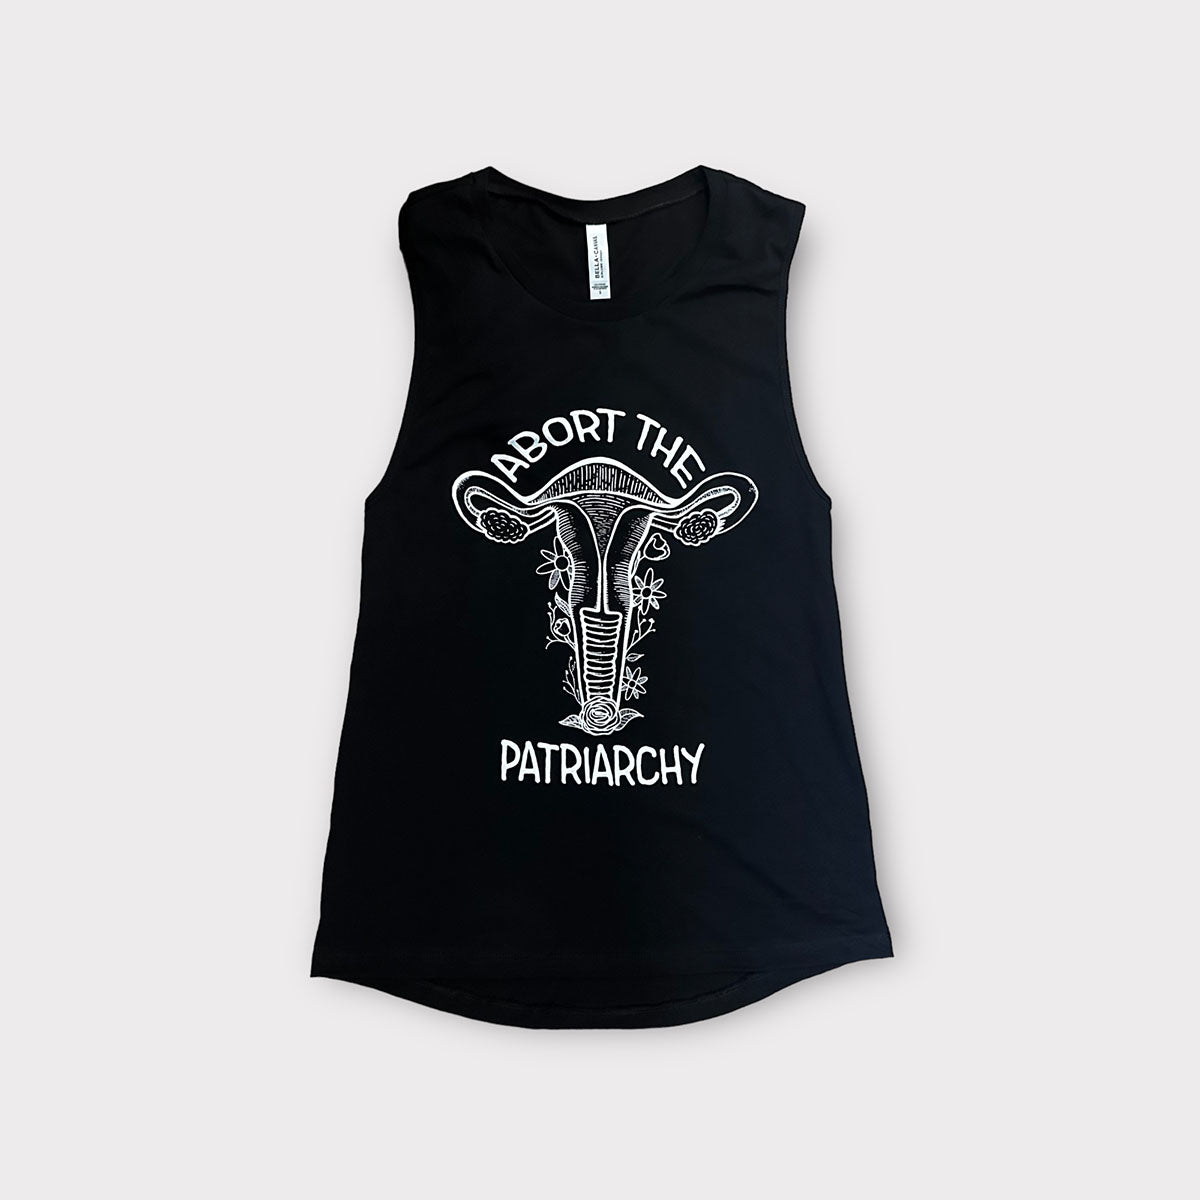 black muscle tank top with a white screen printed floral uterus graphic and "abort the patriarchy" text